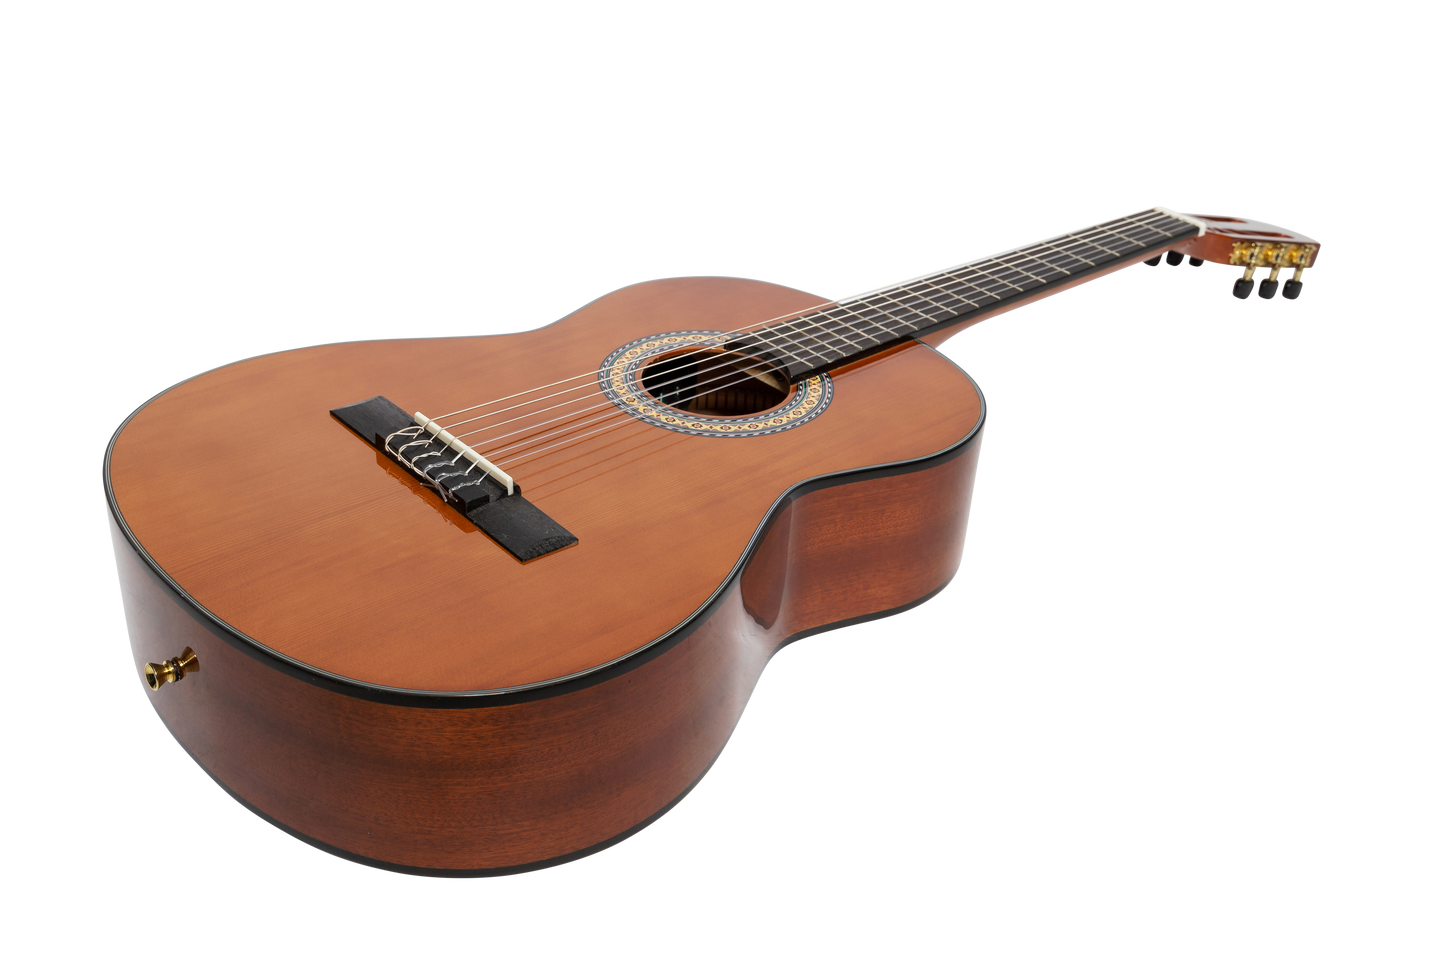 Martinez 'Slim Jim' G-Series 3/4 Size Classical Guitar with Built-in Tuner (Natural-Gloss)